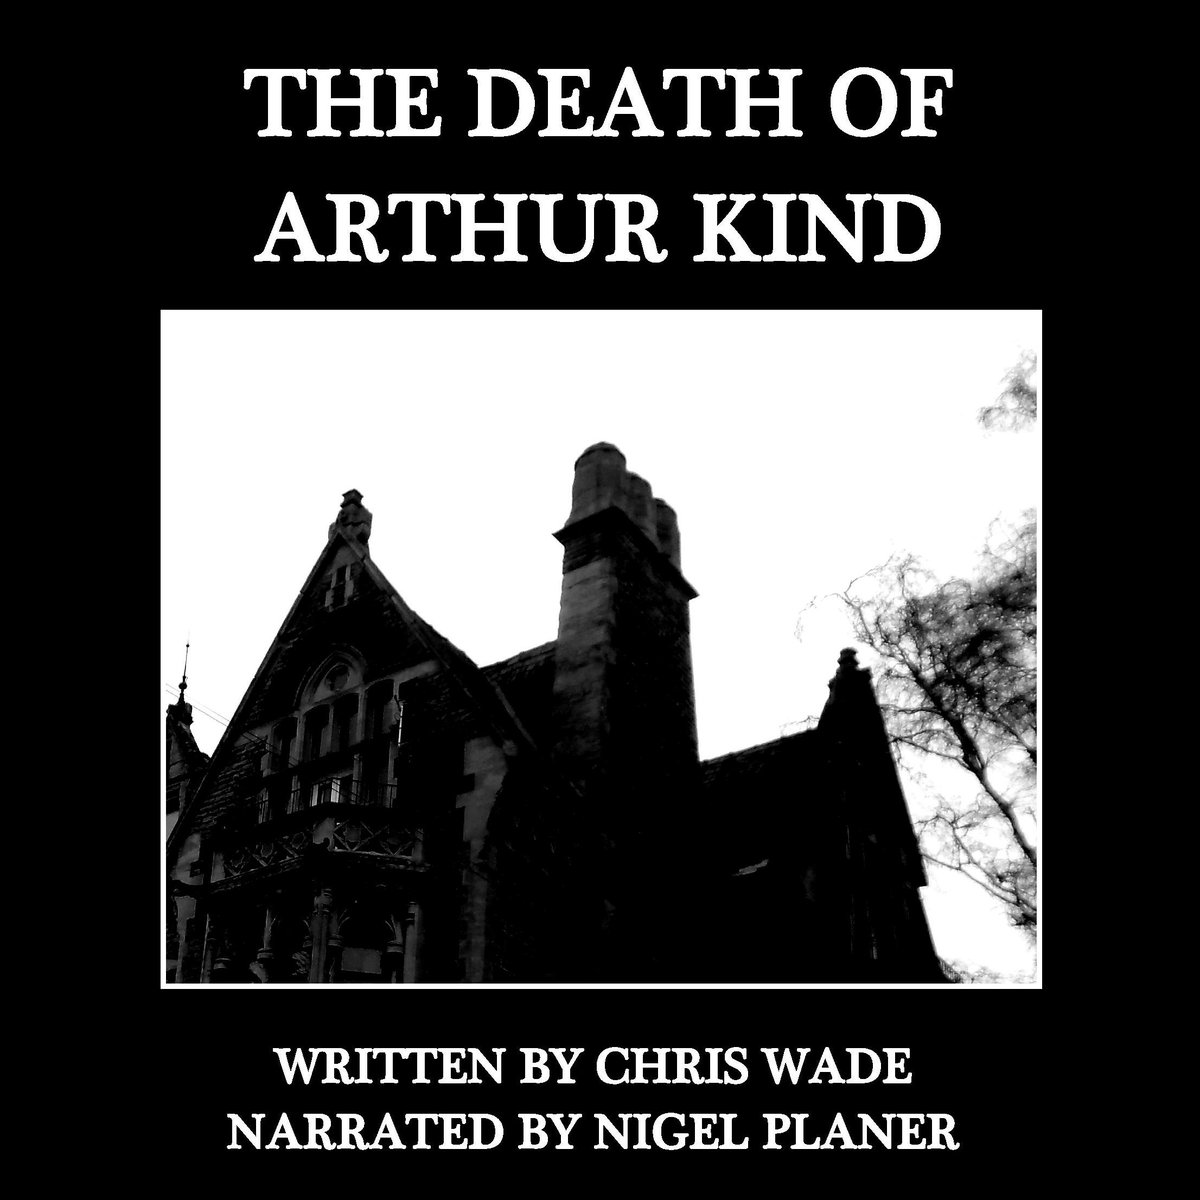 Here is my new audiobook, The Death of Arthur Kind, a supernatural tale narrated by the brilliant Nigel Planer. I'm so happy with how Nigel narrated it. If you fancy listening to a slightly creepy story, you can stream or download it here: wisdomtwinsbooks.bandcamp.com/album/the-deat… @NigelPlaner1